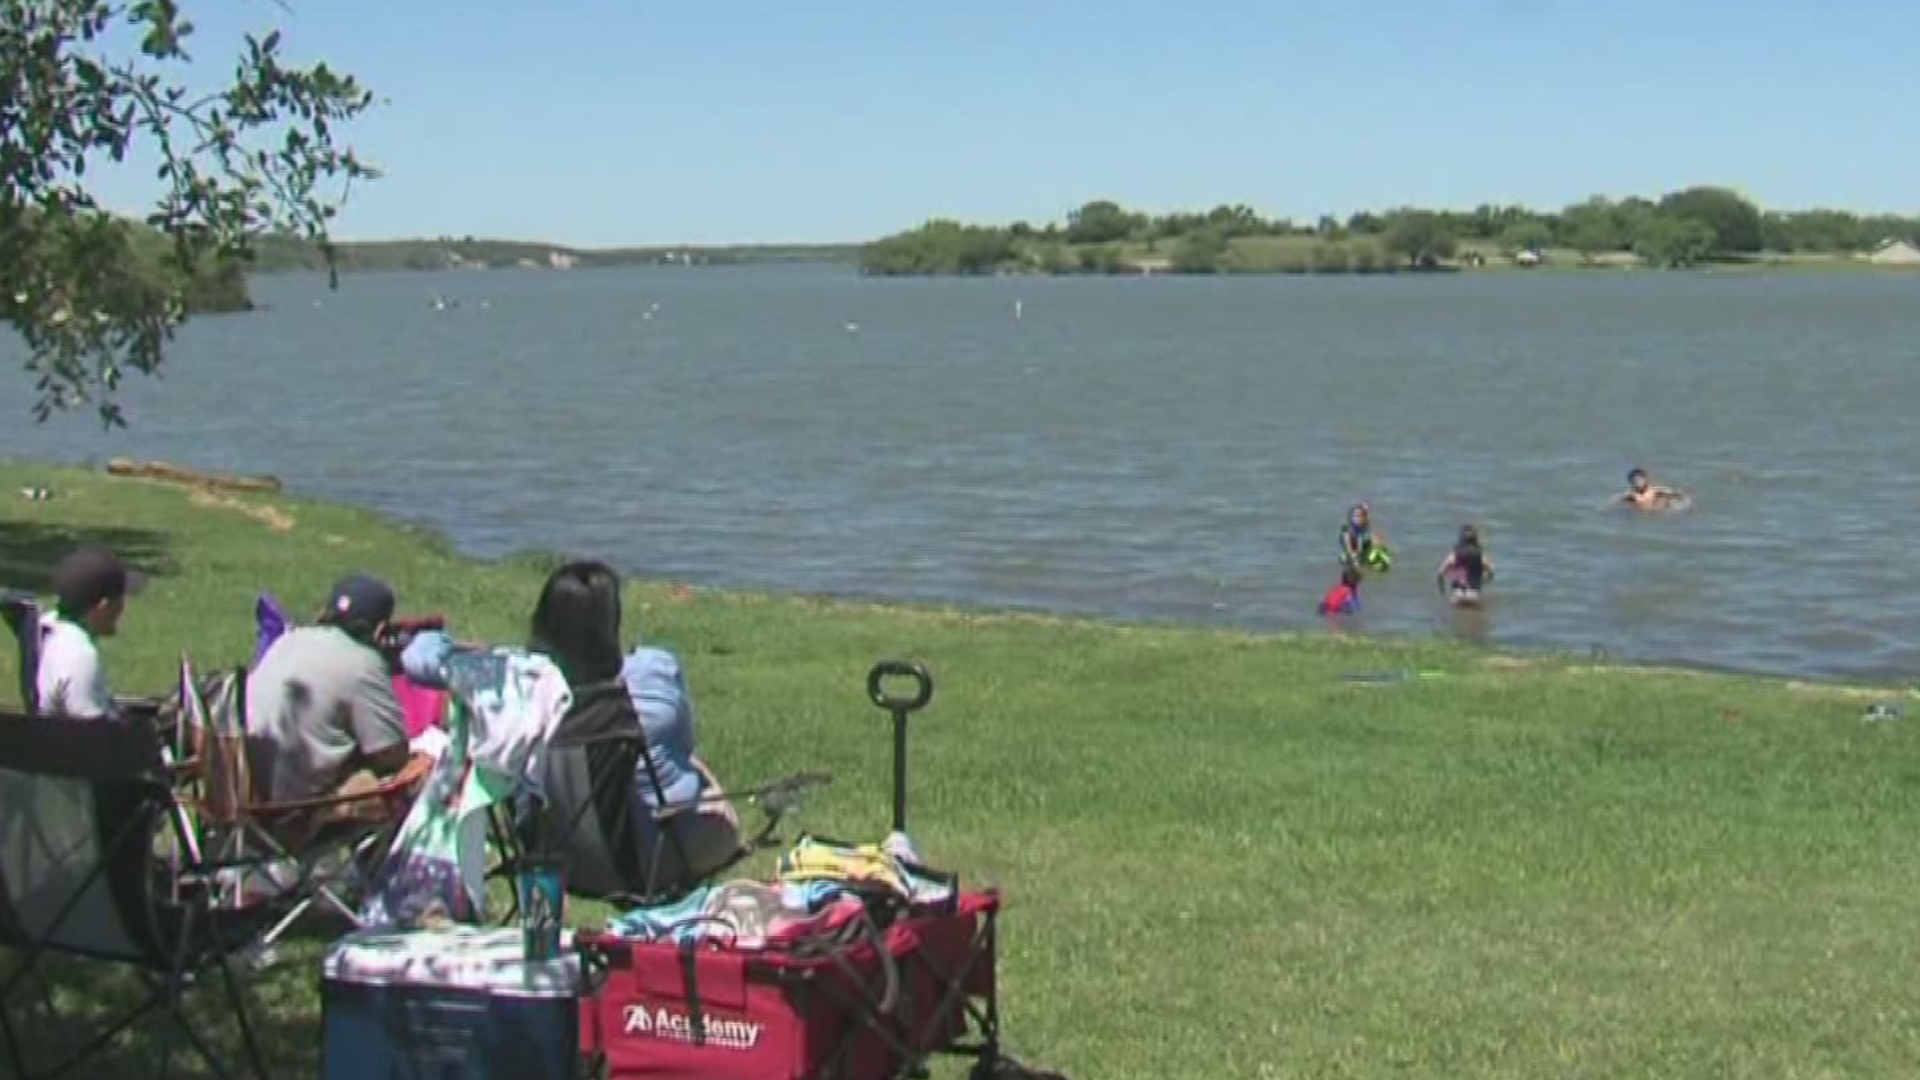 Mustang Island State Park announced they will not be ready to reopen by Monday, but many others are open according to the Texas Parks & Wildlife Department website.